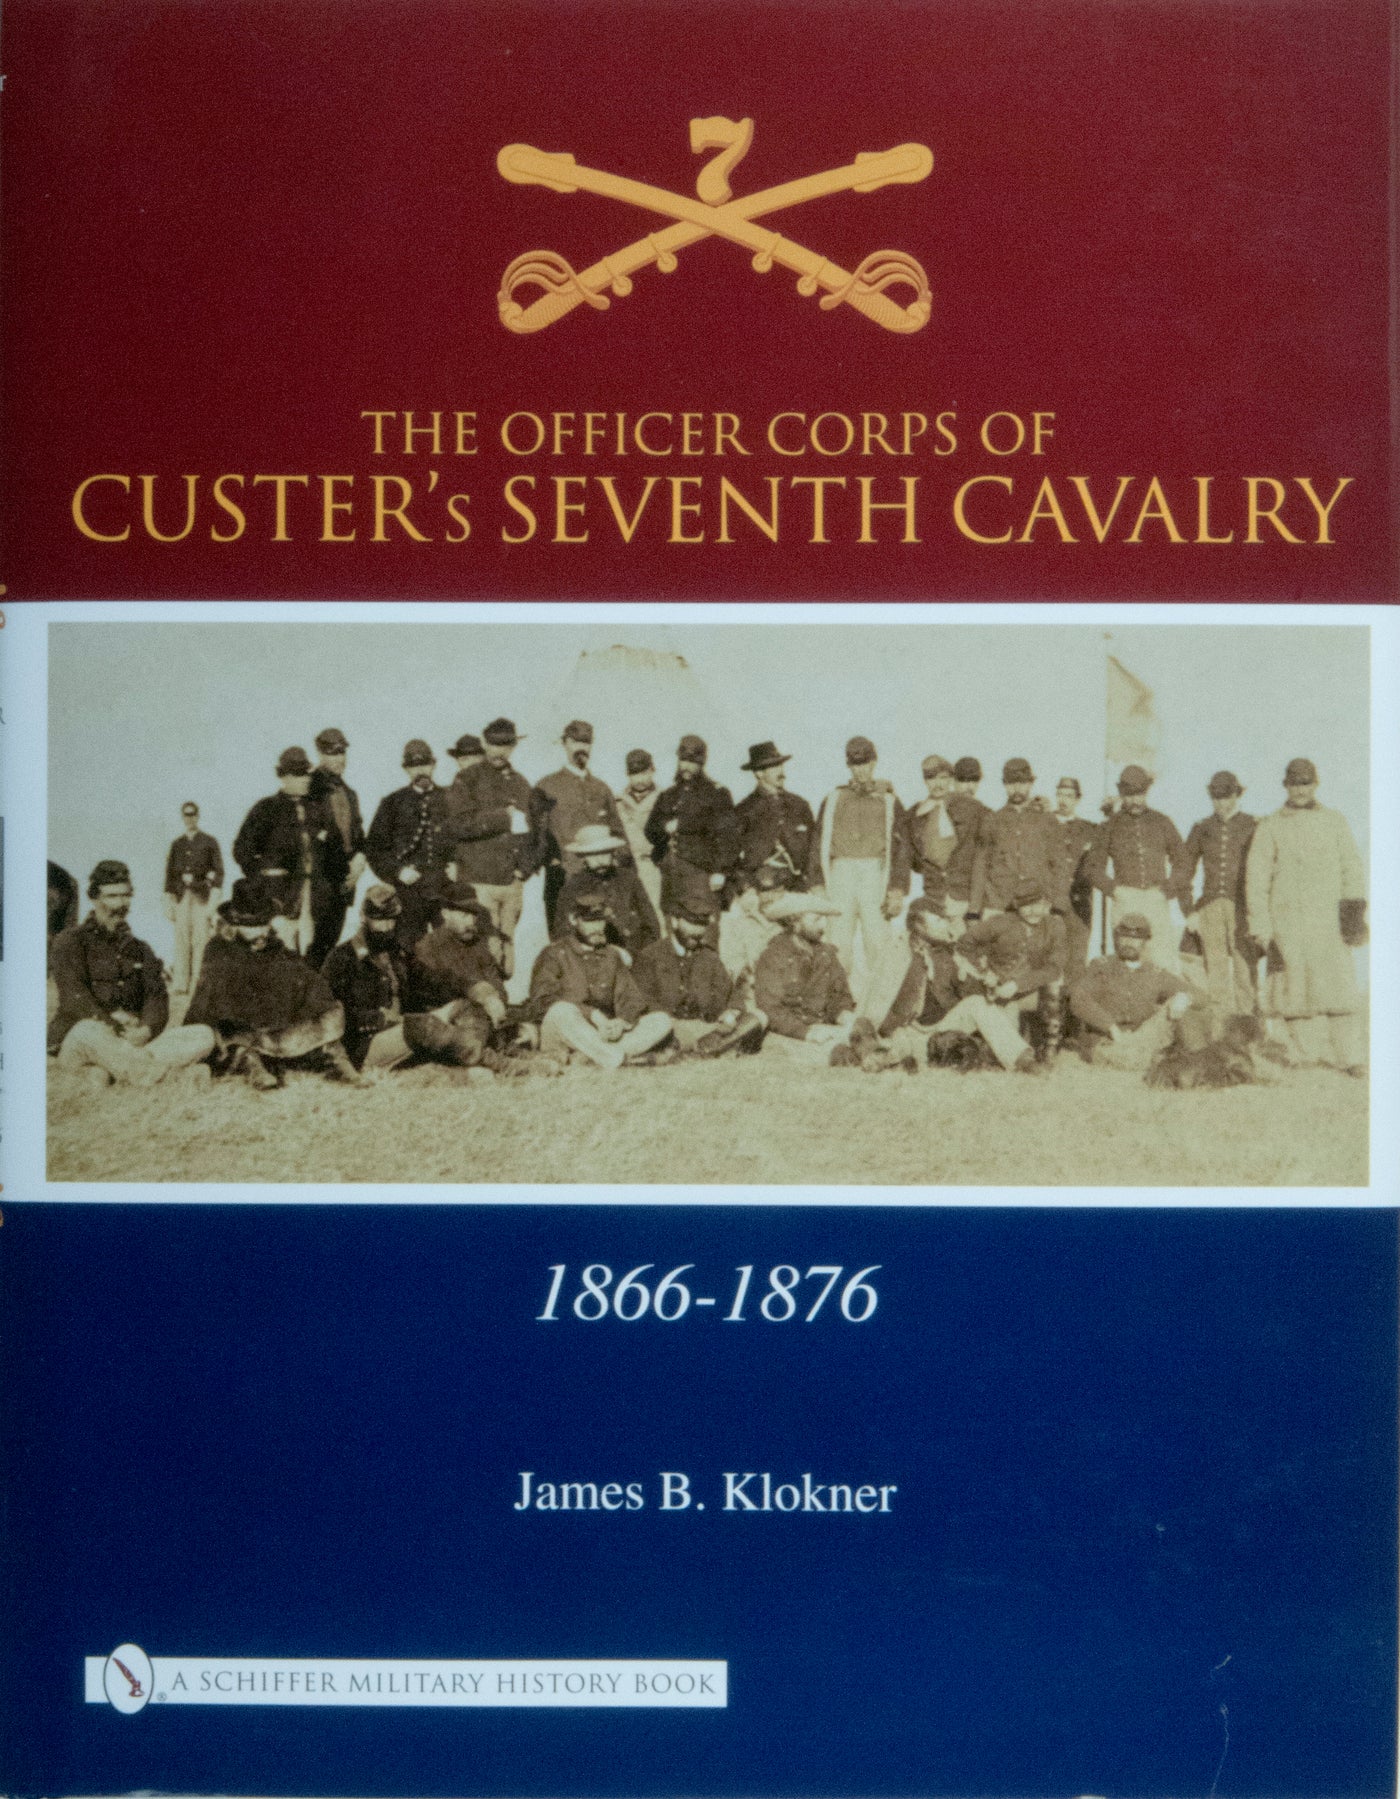 The Officer Corps of Custer's Seventh Cavalry